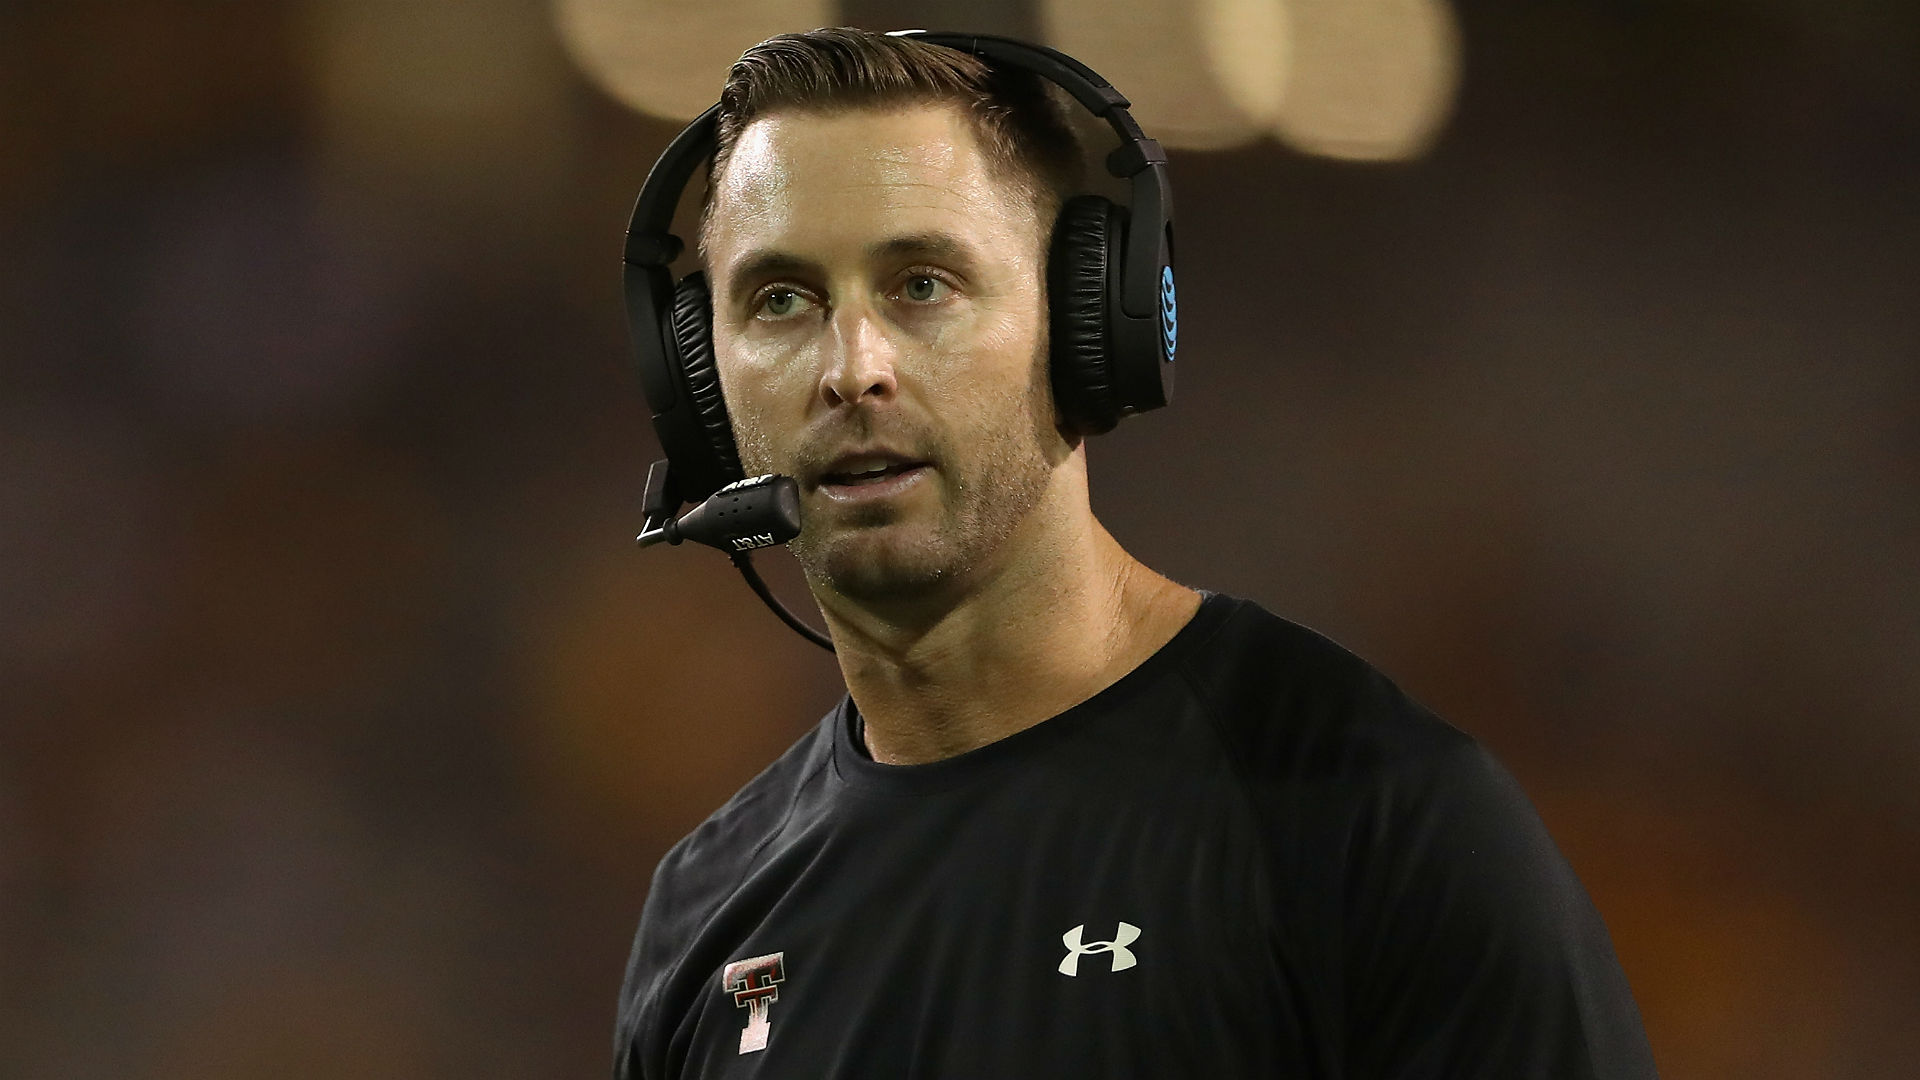 Kliff Kingsbury rumored to USC, but reports say otherwise | NCAA ...